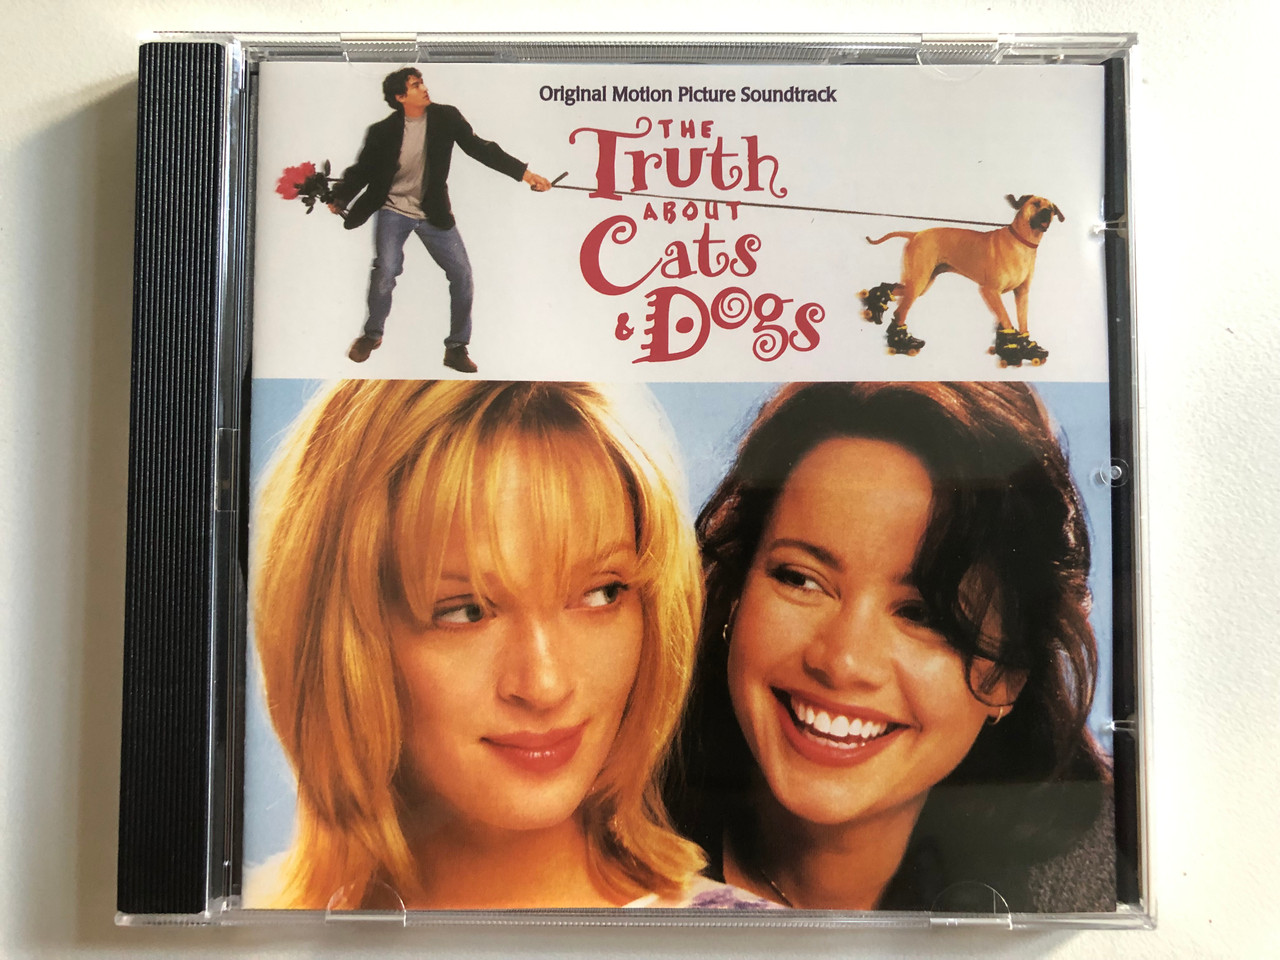 https://cdn10.bigcommerce.com/s-62bdpkt7pb/products/0/images/313862/The_Truth_About_Cats_Dogs_Original_Motion_Picture_Soundtrack_AM_Records_Audio_CD_1996_540_507-2_1__34481.1701091850.1280.1280.JPG?c=2